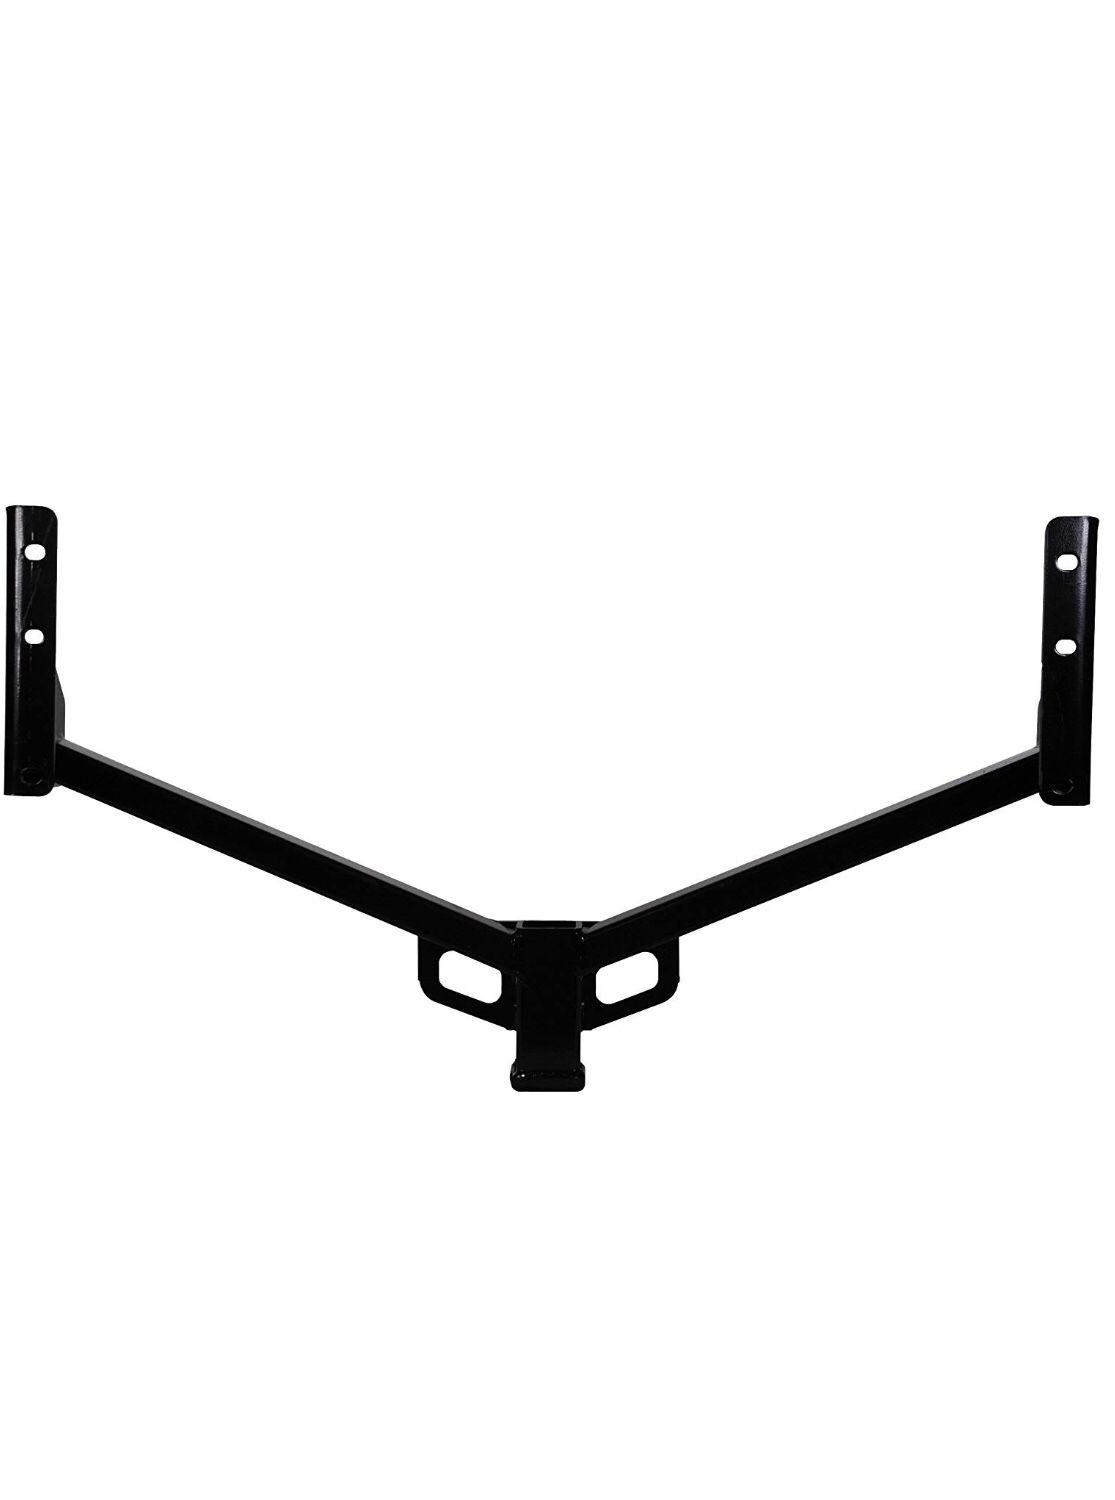 Reese trailer hitch